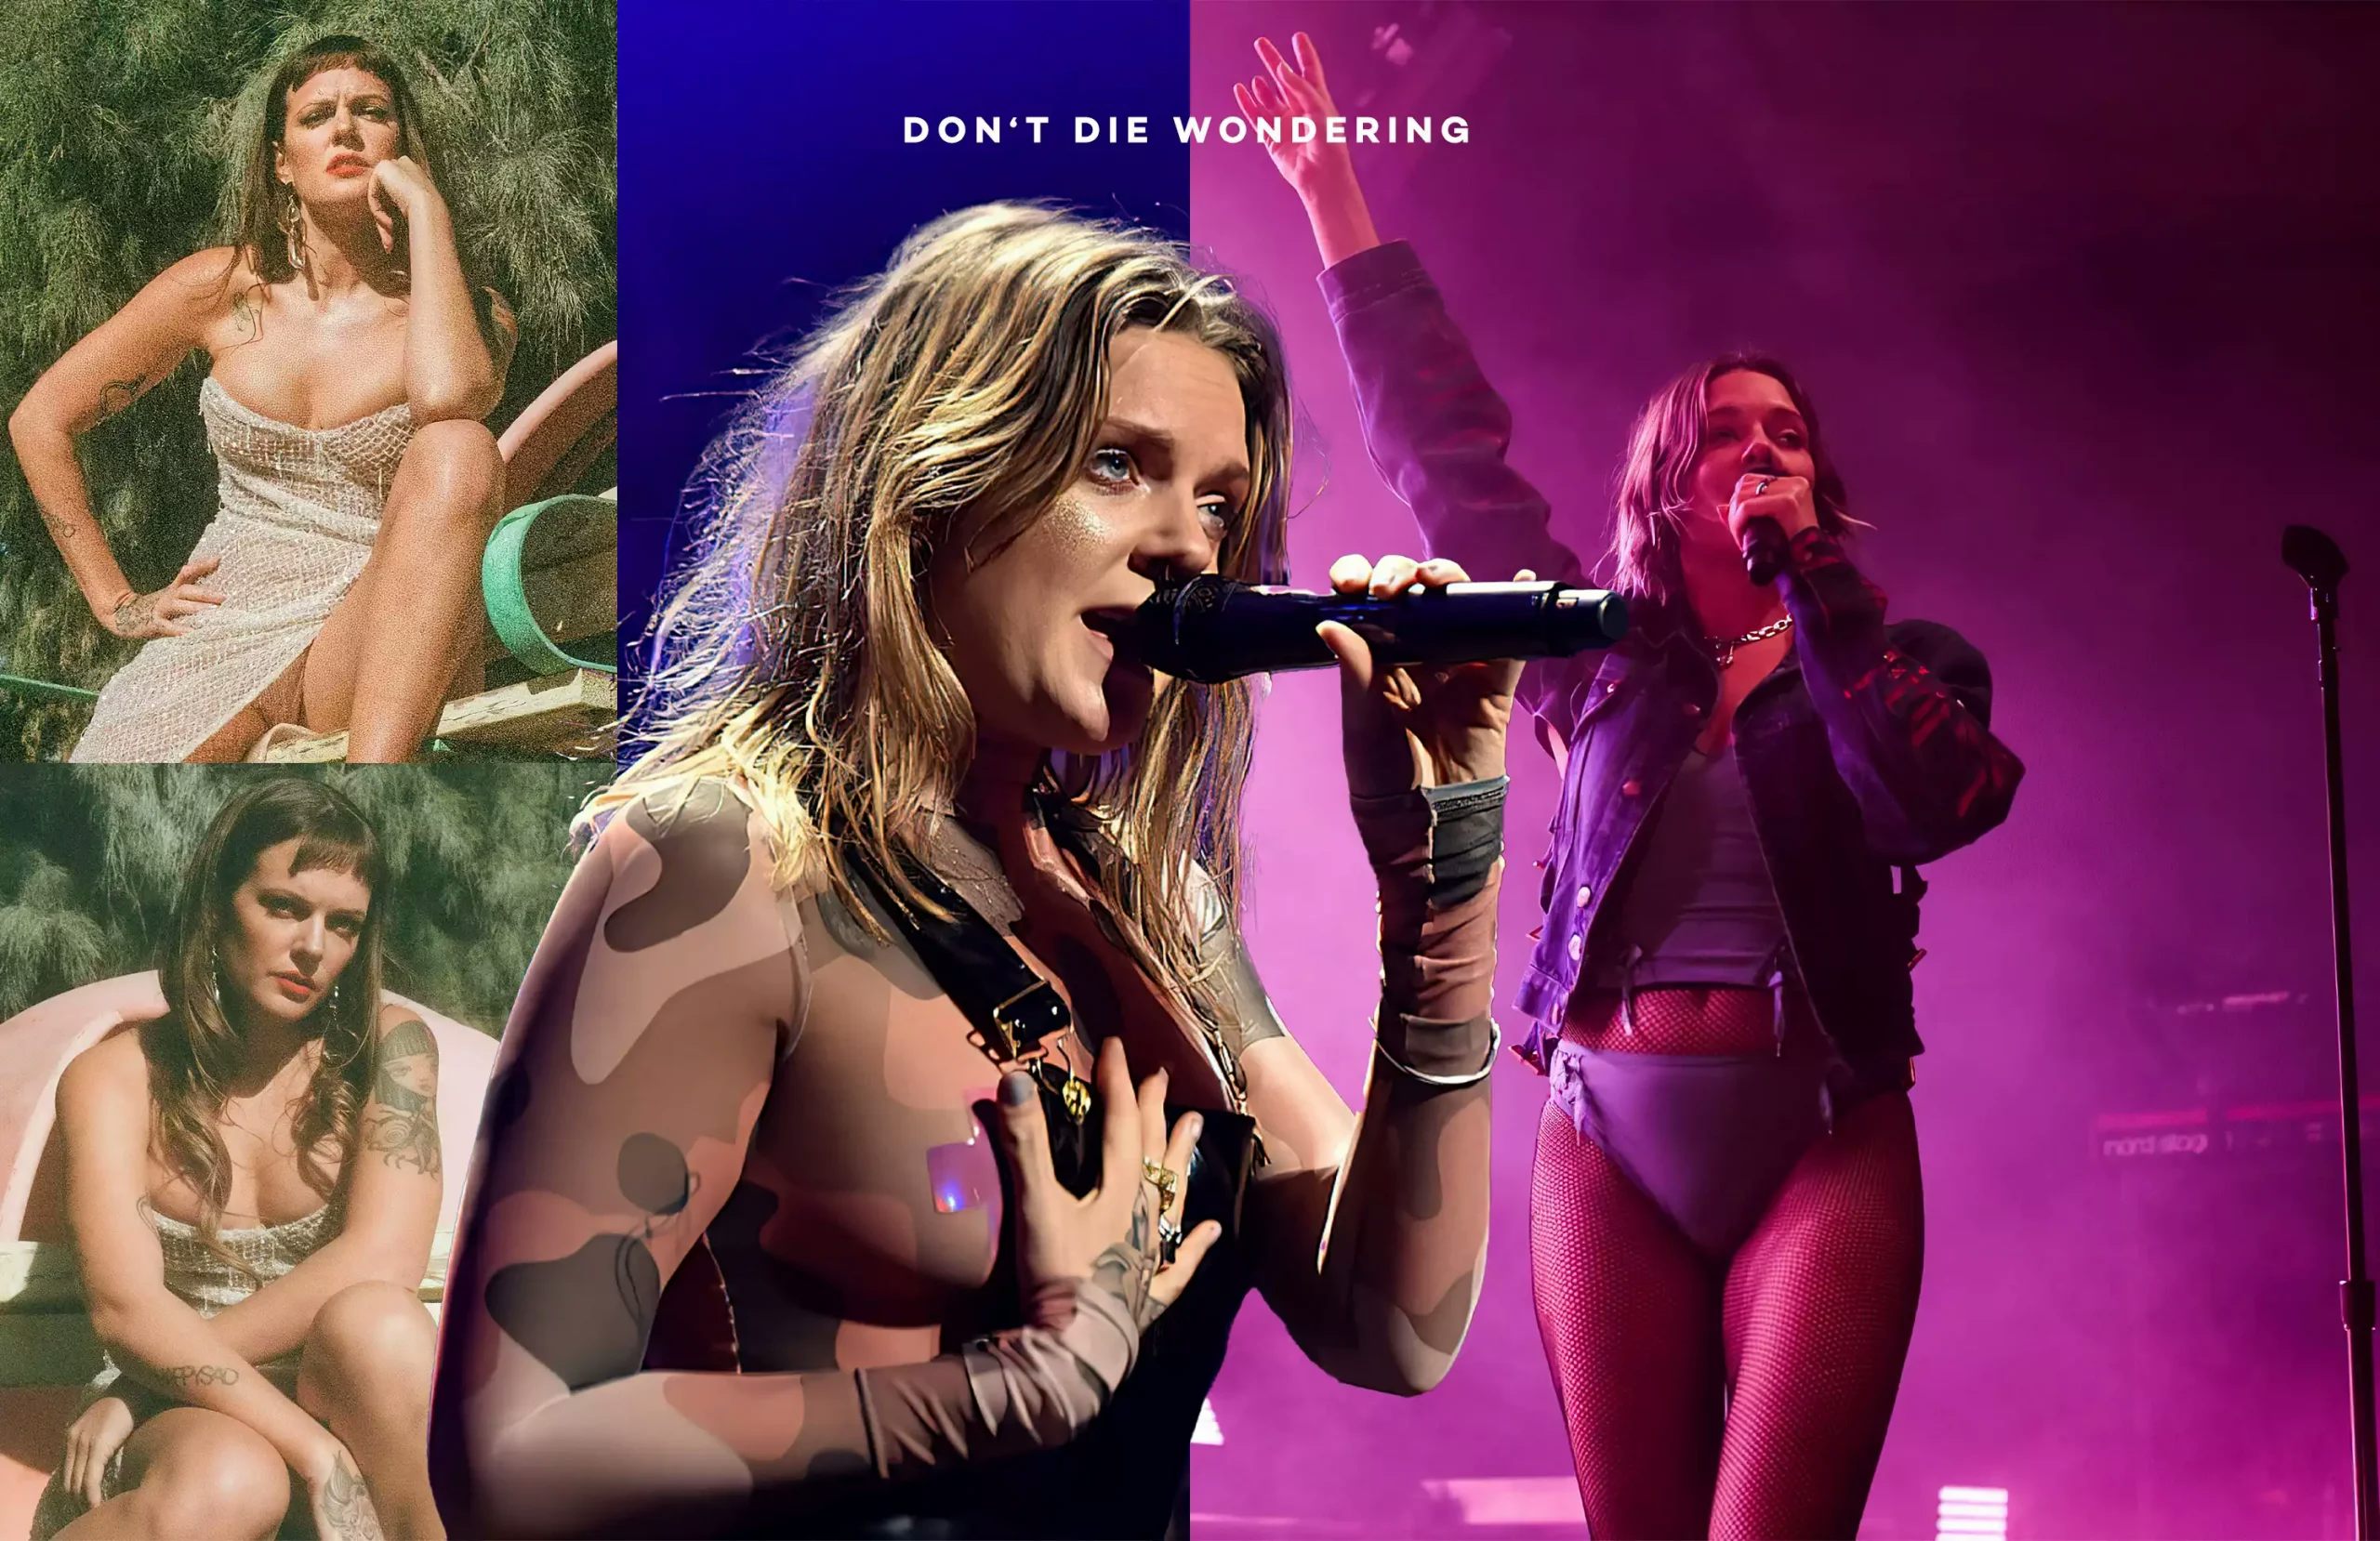 The ‘Habit’ pop star, Tove Lo is back with her new UK and European tours